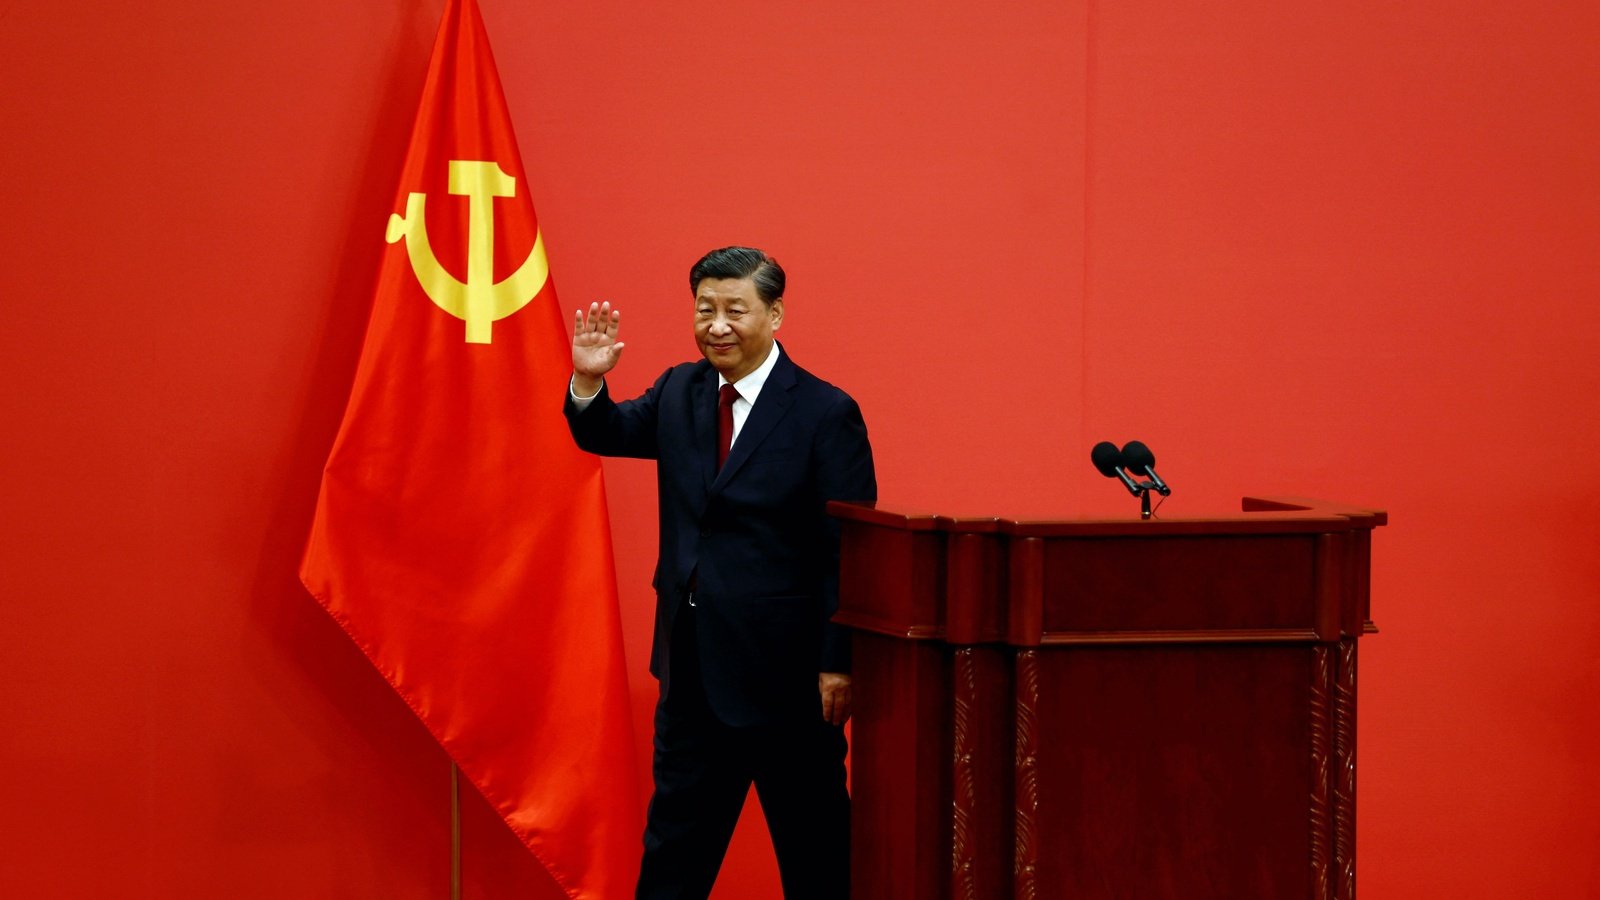 Xi Jinping Re-elected as Chinese President in Unprecedented Move